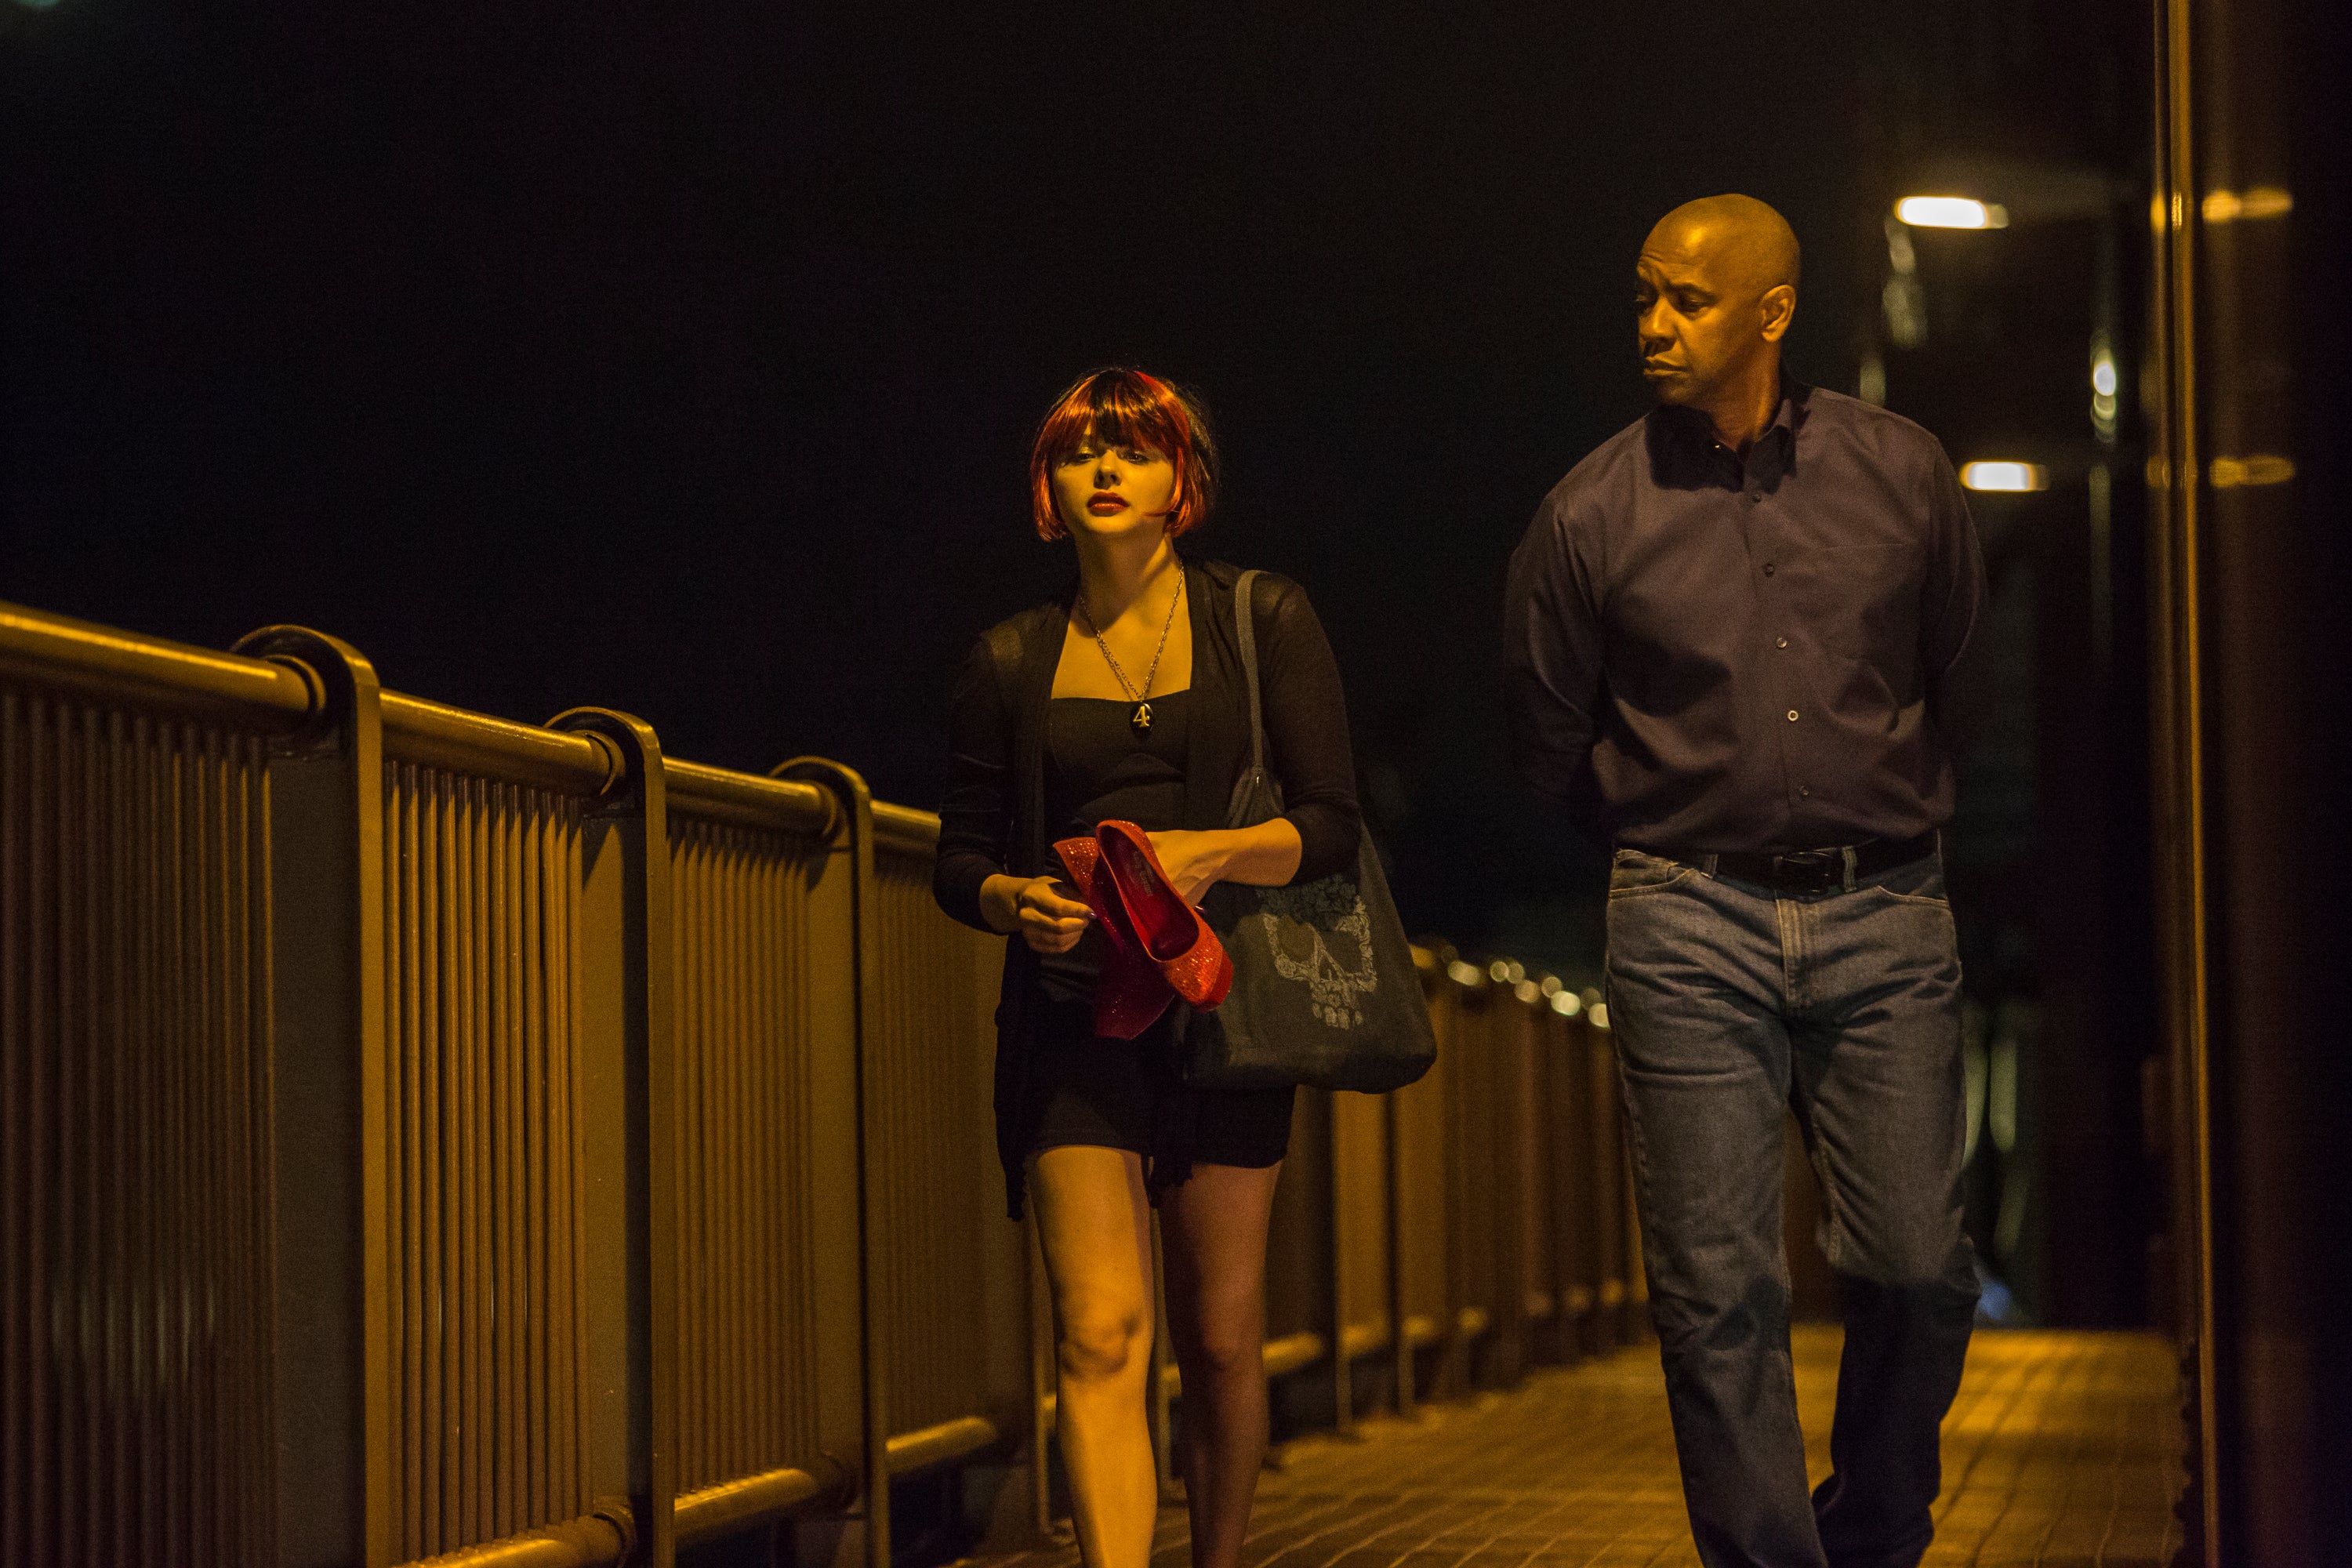 The Equalizer, film The plotting makes no sense | The Independent | The Independent